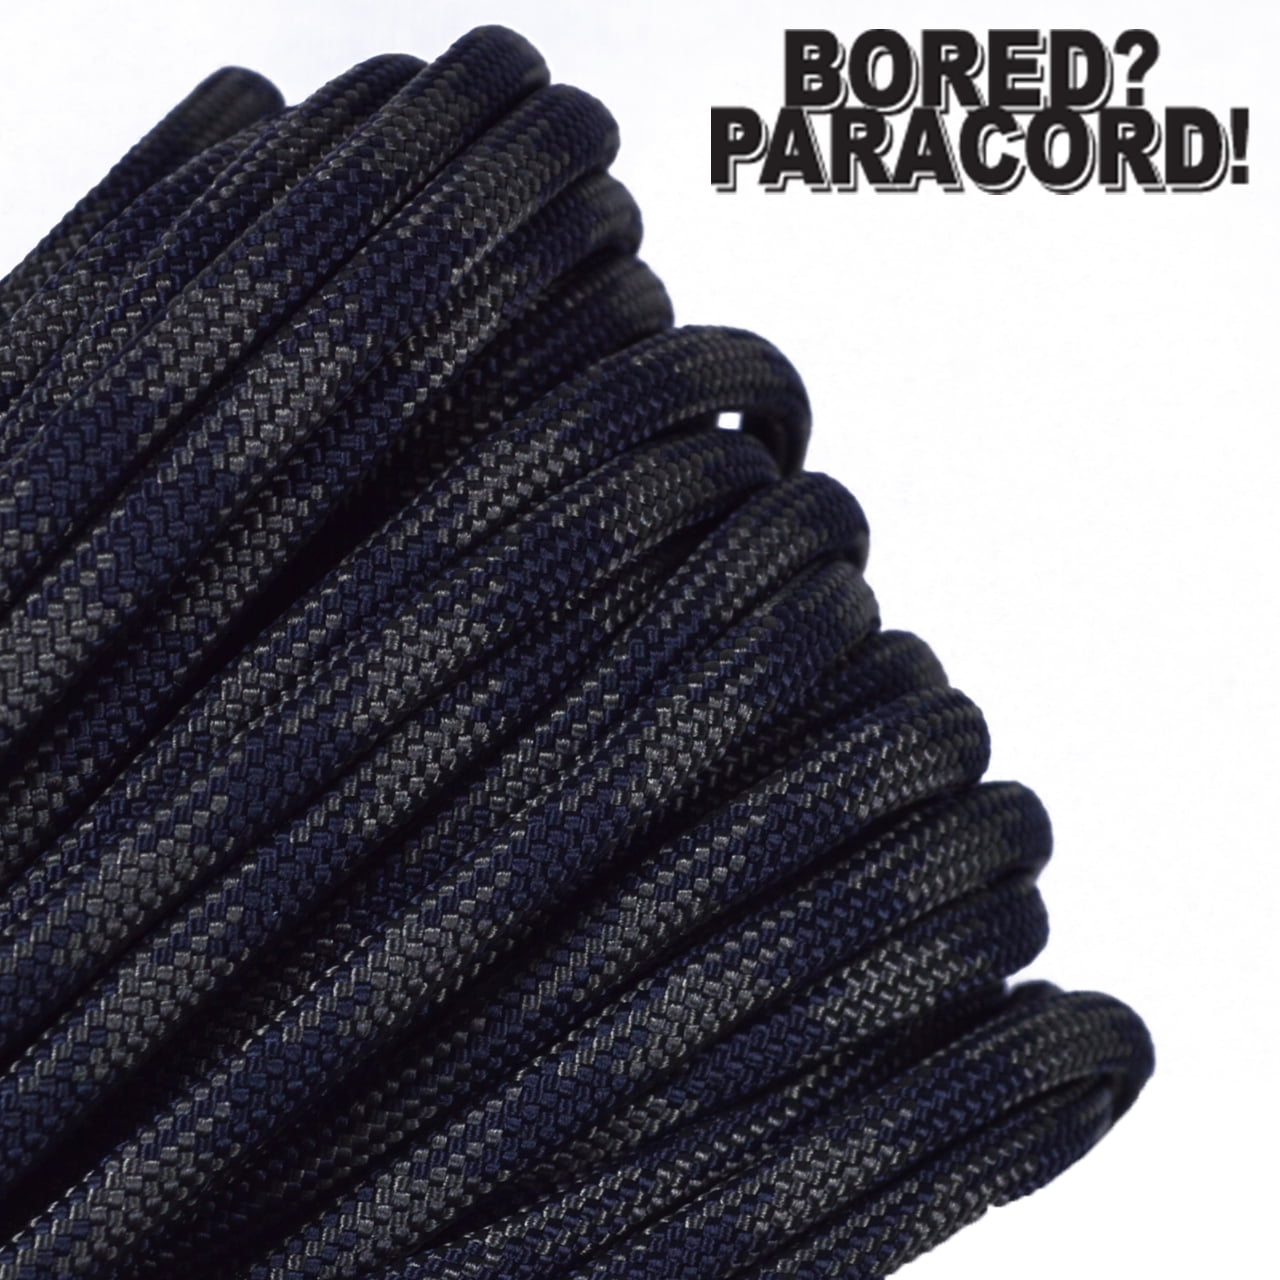 Great for Bracelets and Lanyards Paracord Hongda Paracord/550 Paracord/Paracord 550/100% Nylon Paracord Used by The US Military 